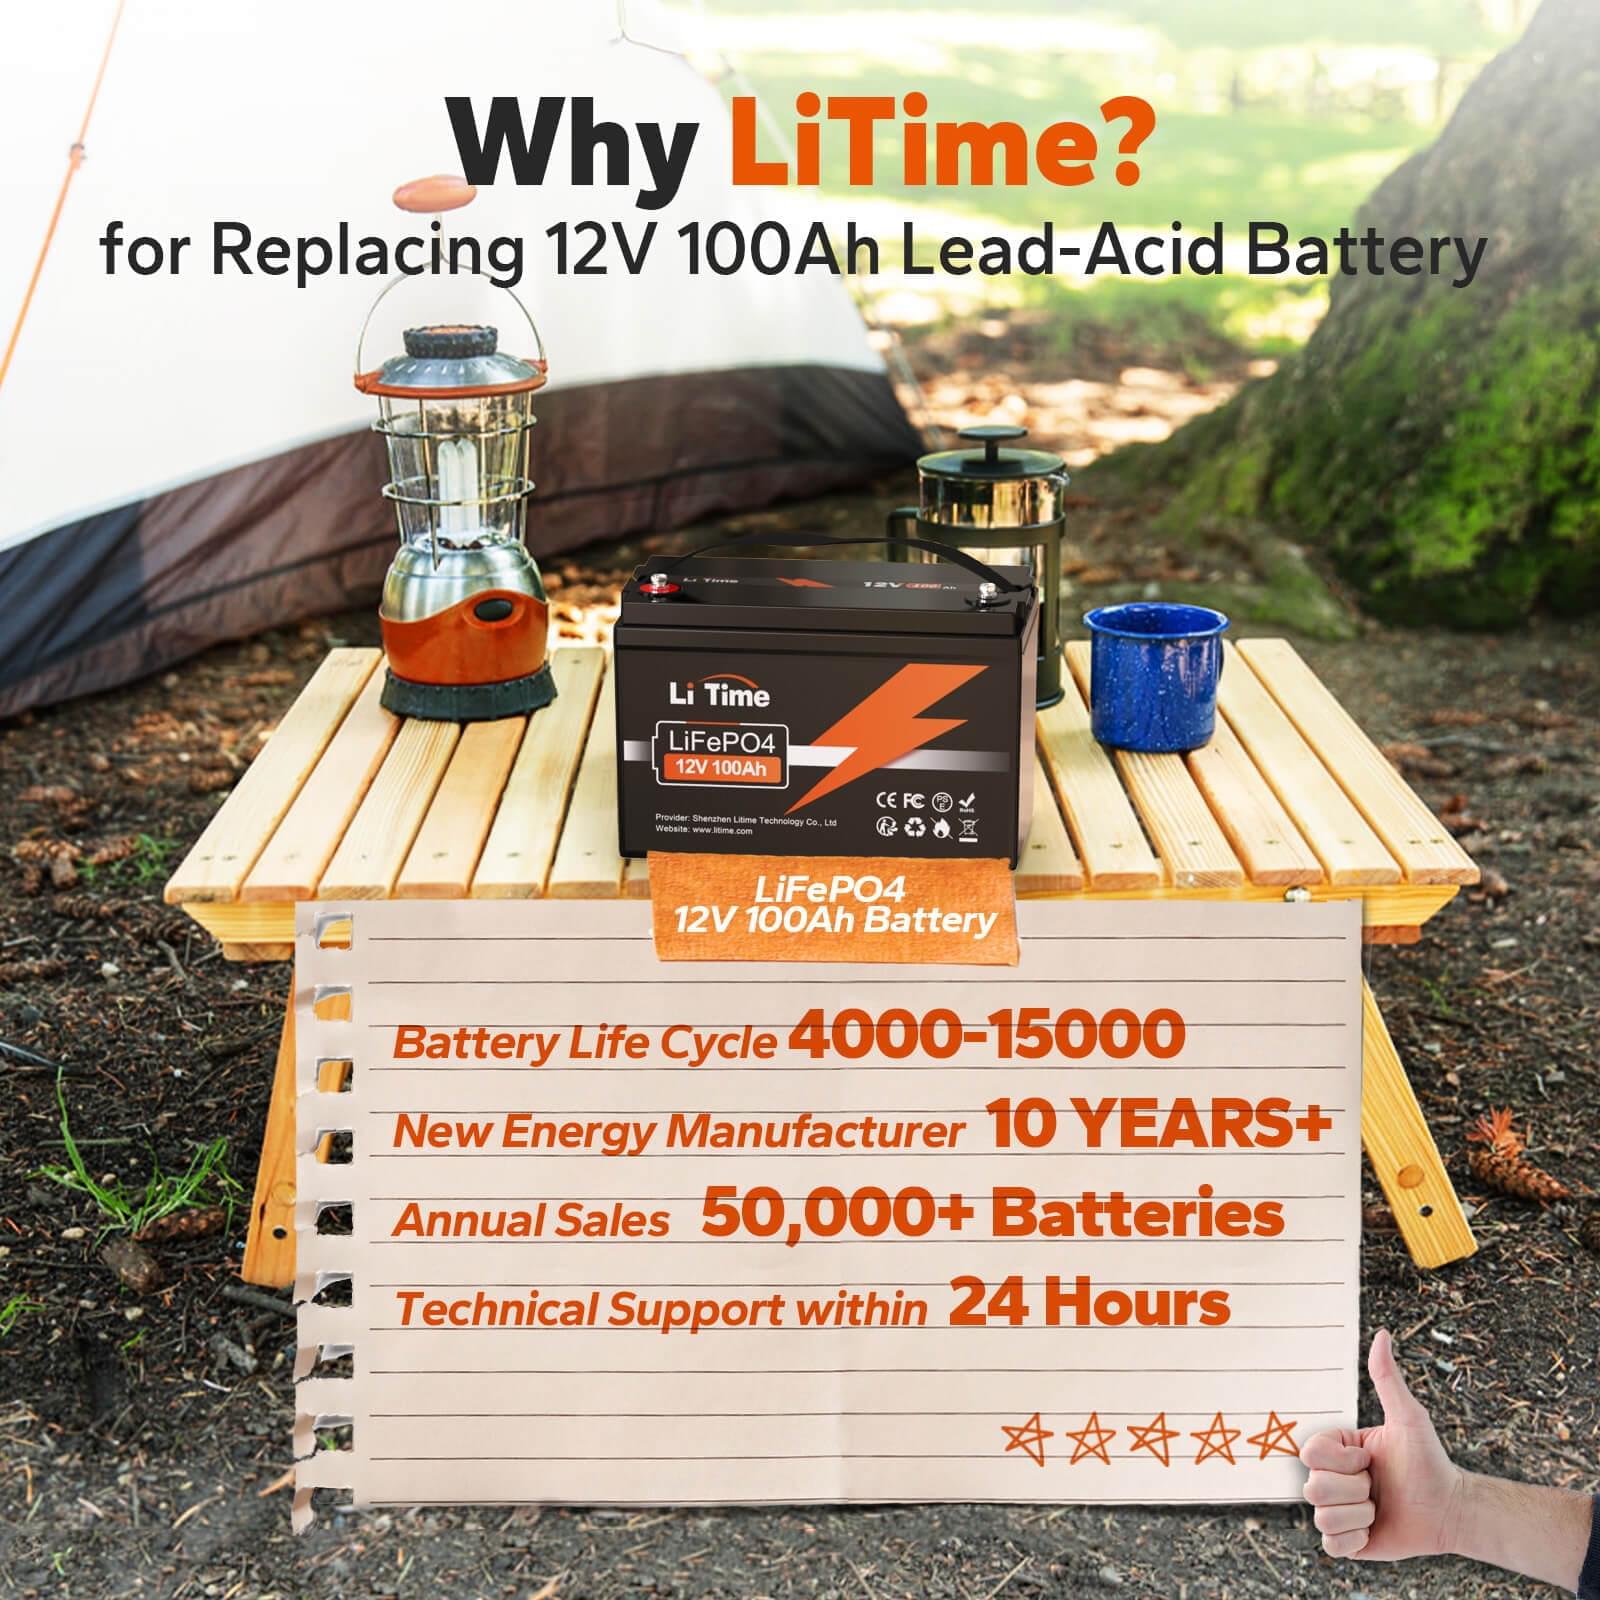 LiTime 12V 100Ah LiFePO4 Lithium Battery, Built-in 100A BMS, 1280Wh Energy